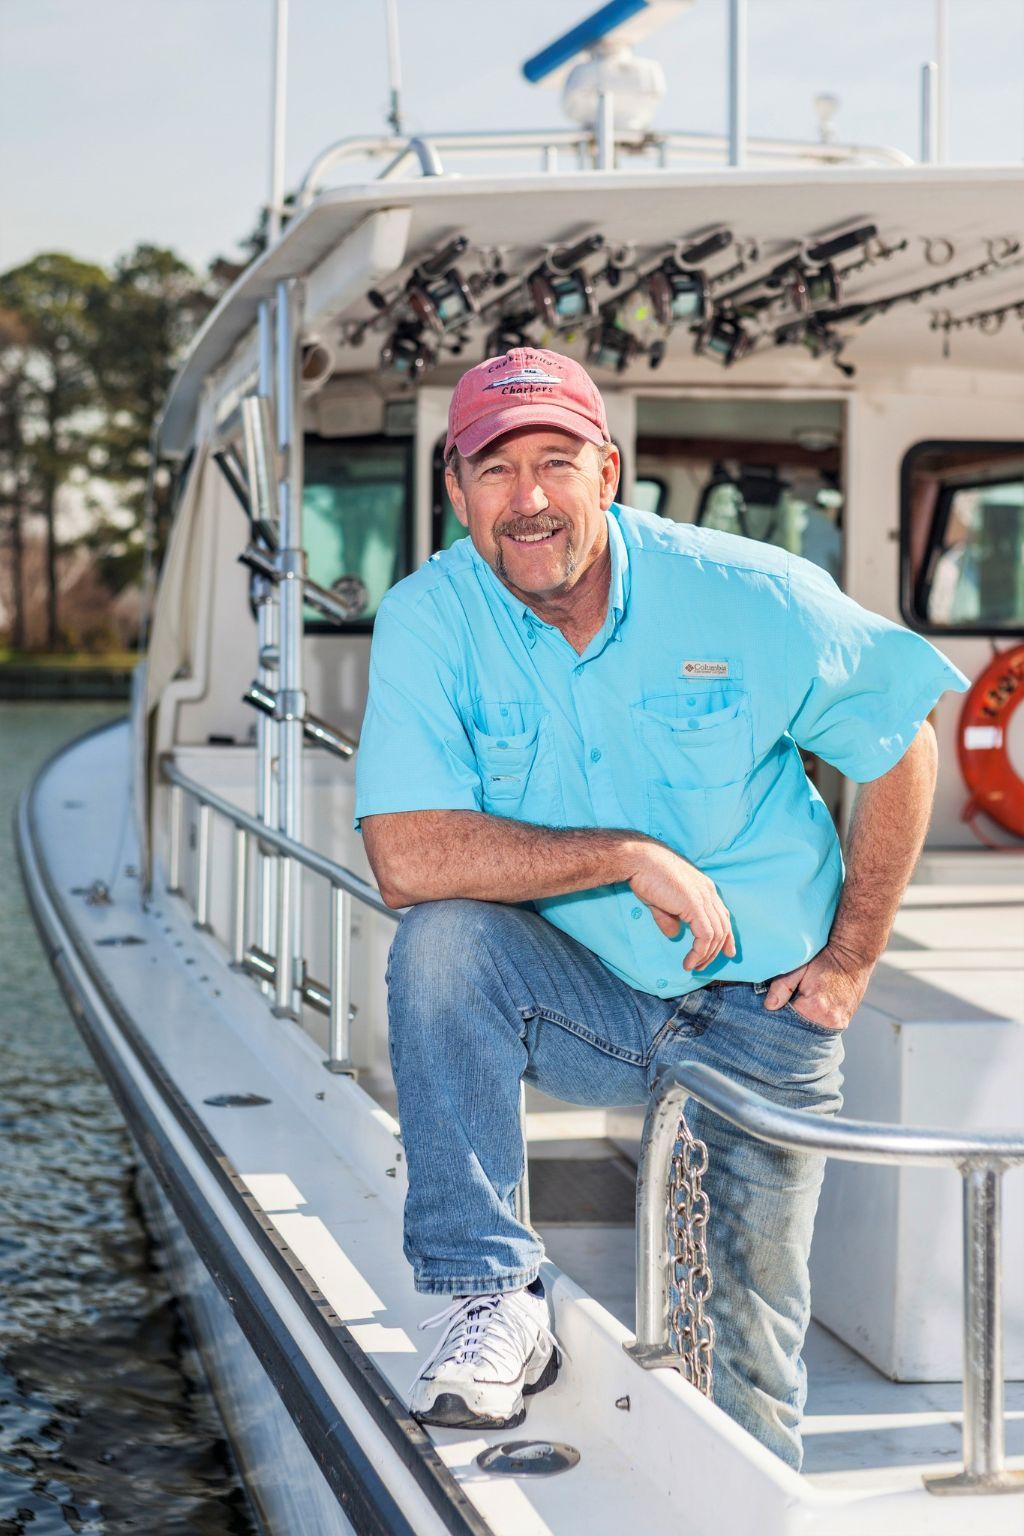 Sunset Cruise and Catered Picnic with Billy Pipkin